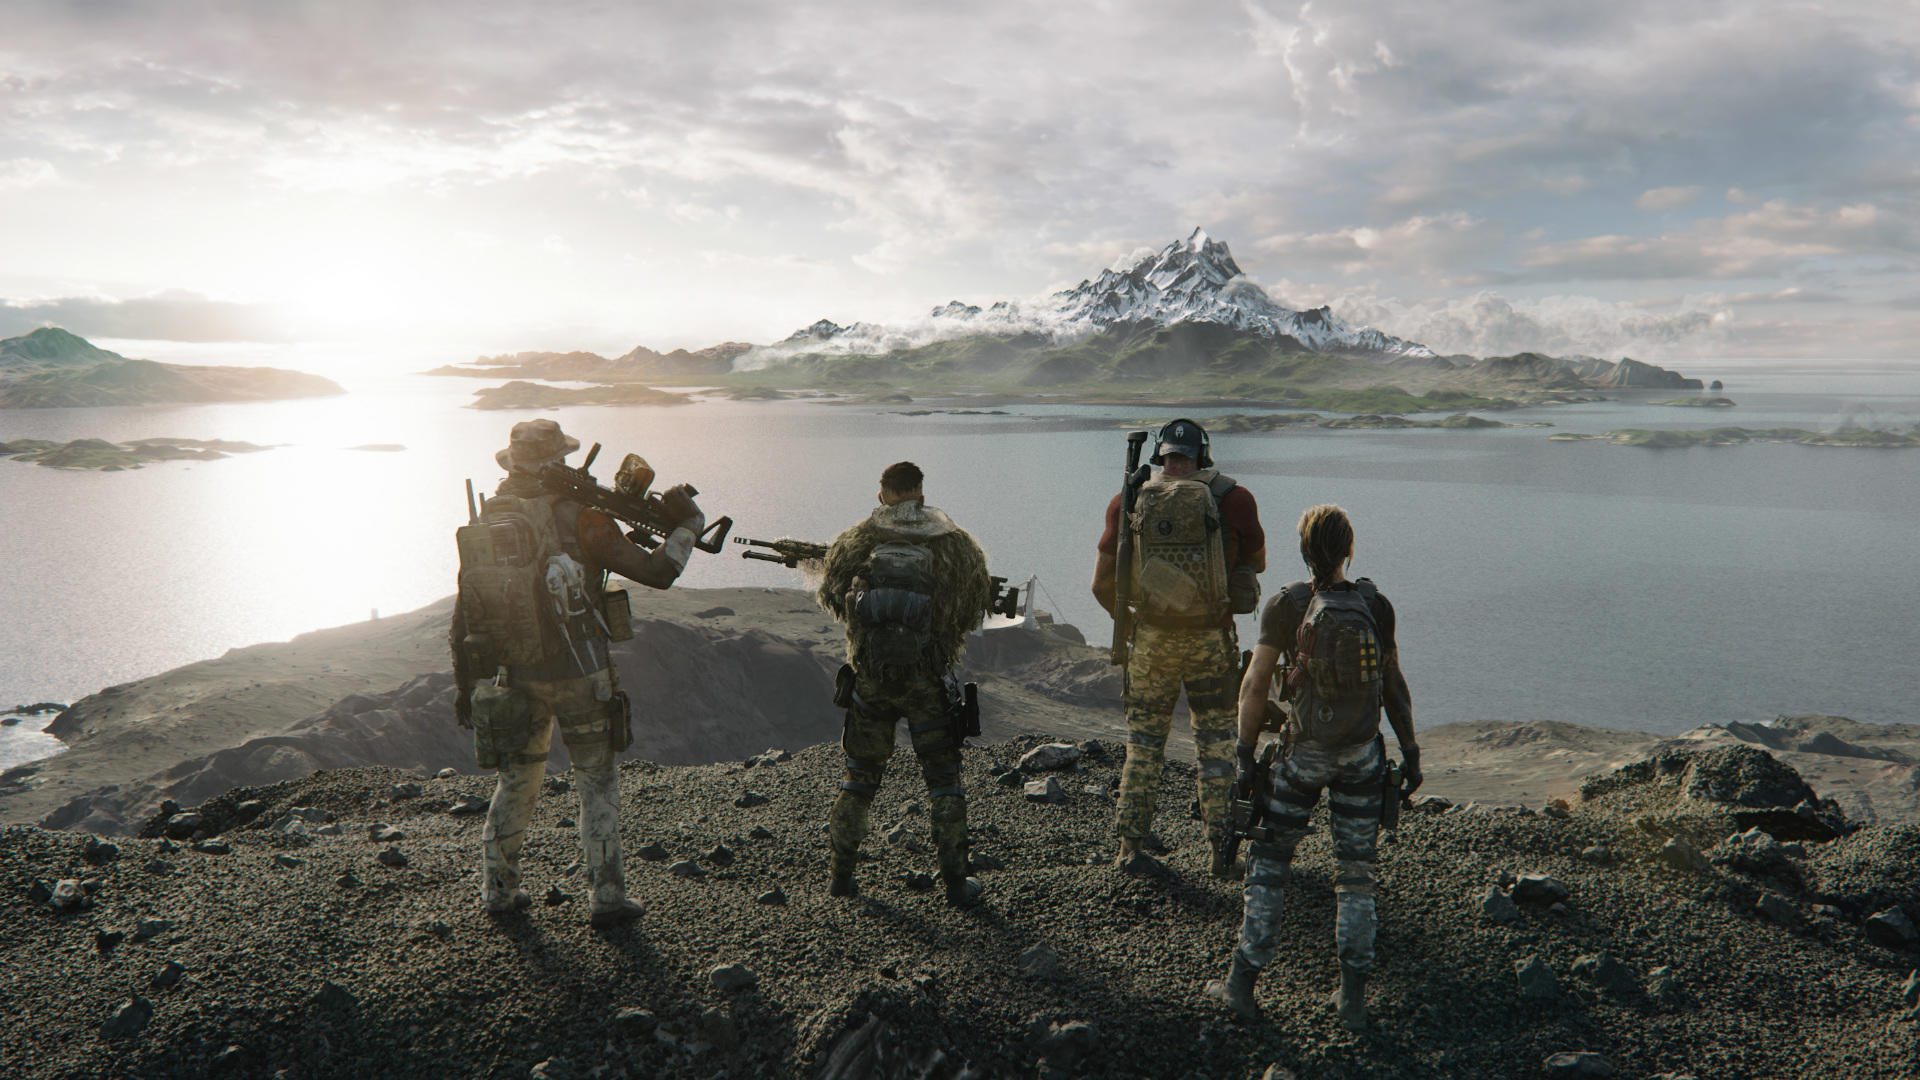 ghost recon breakpoint story missions